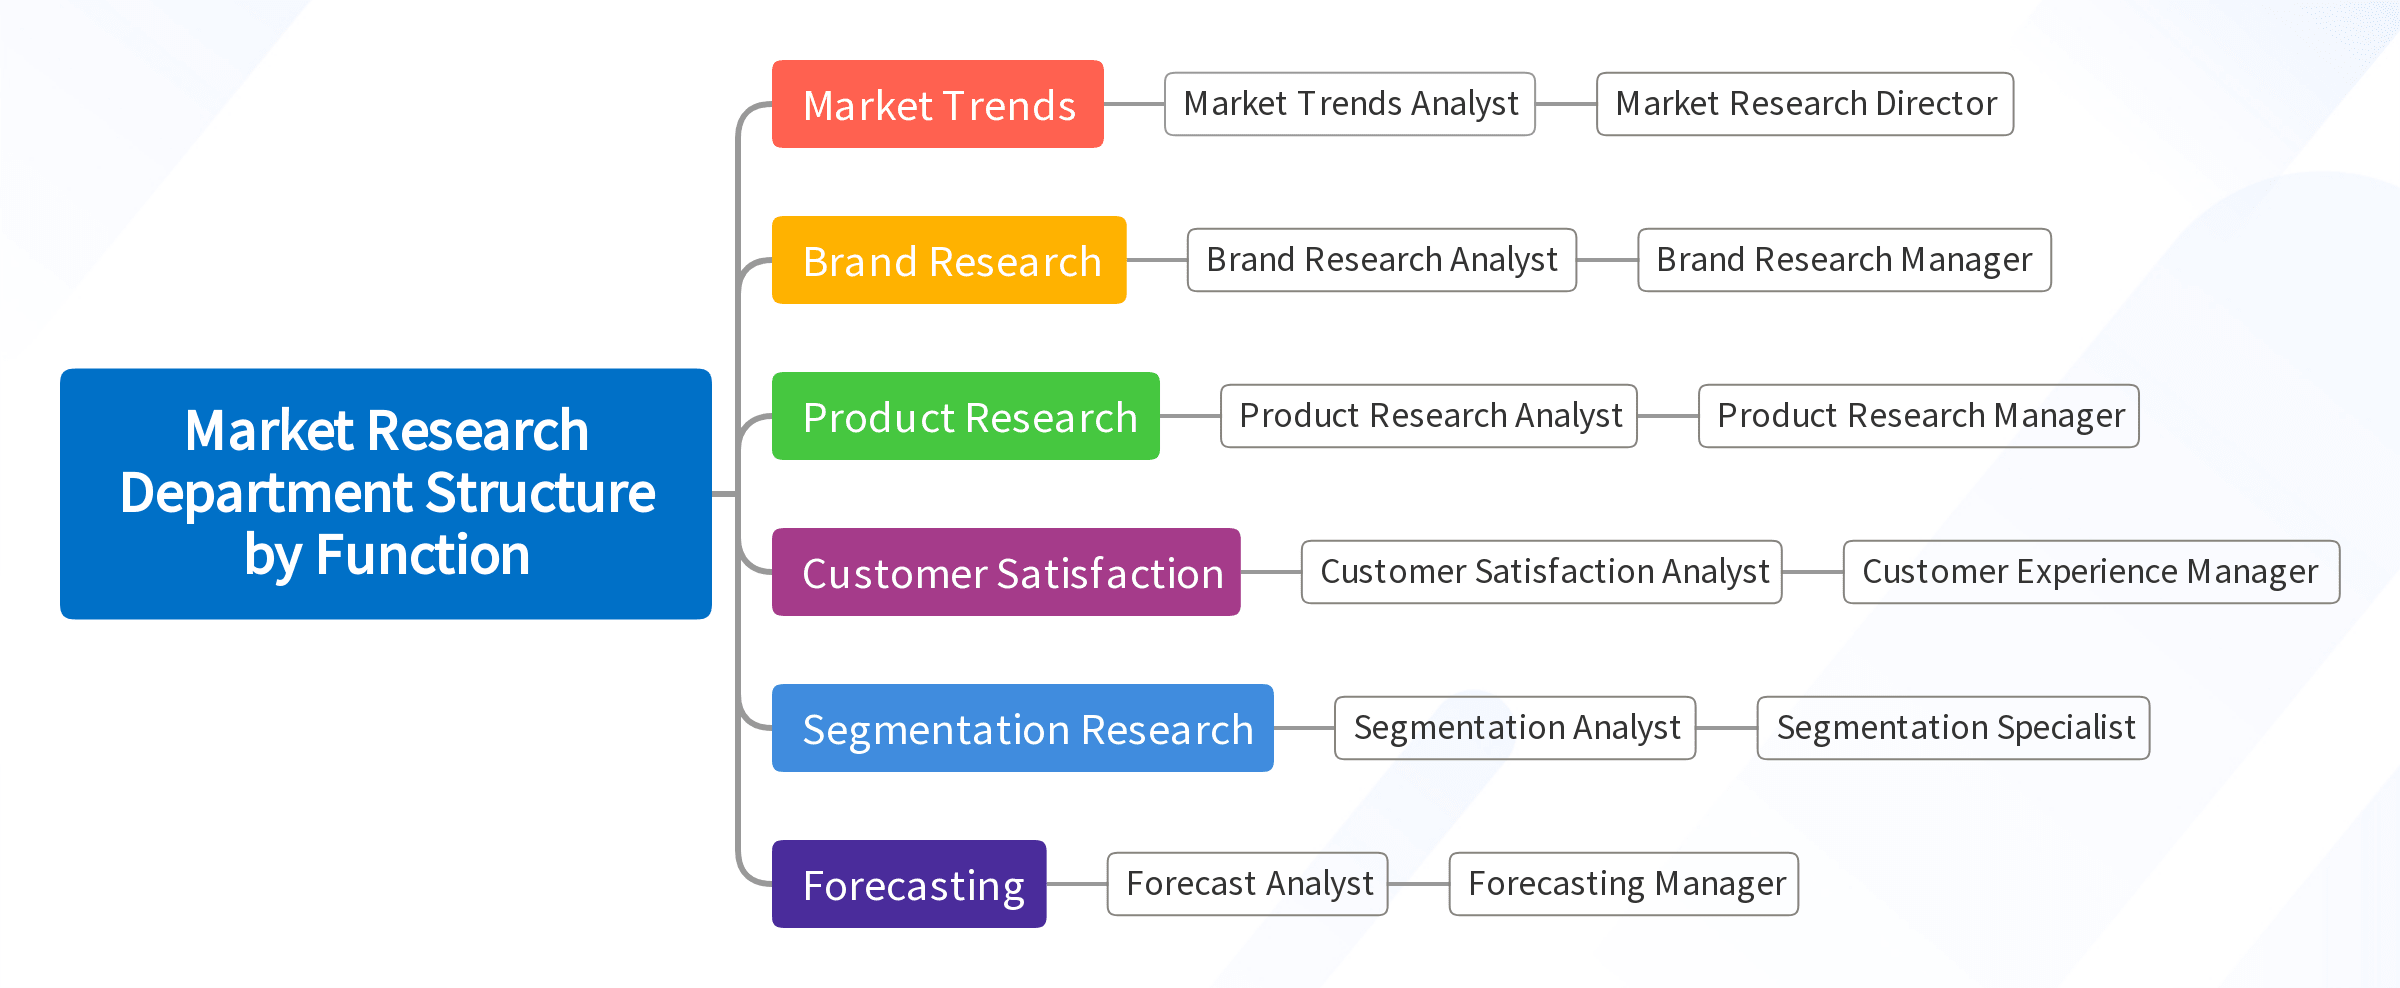 Market Research Department Structure by Function